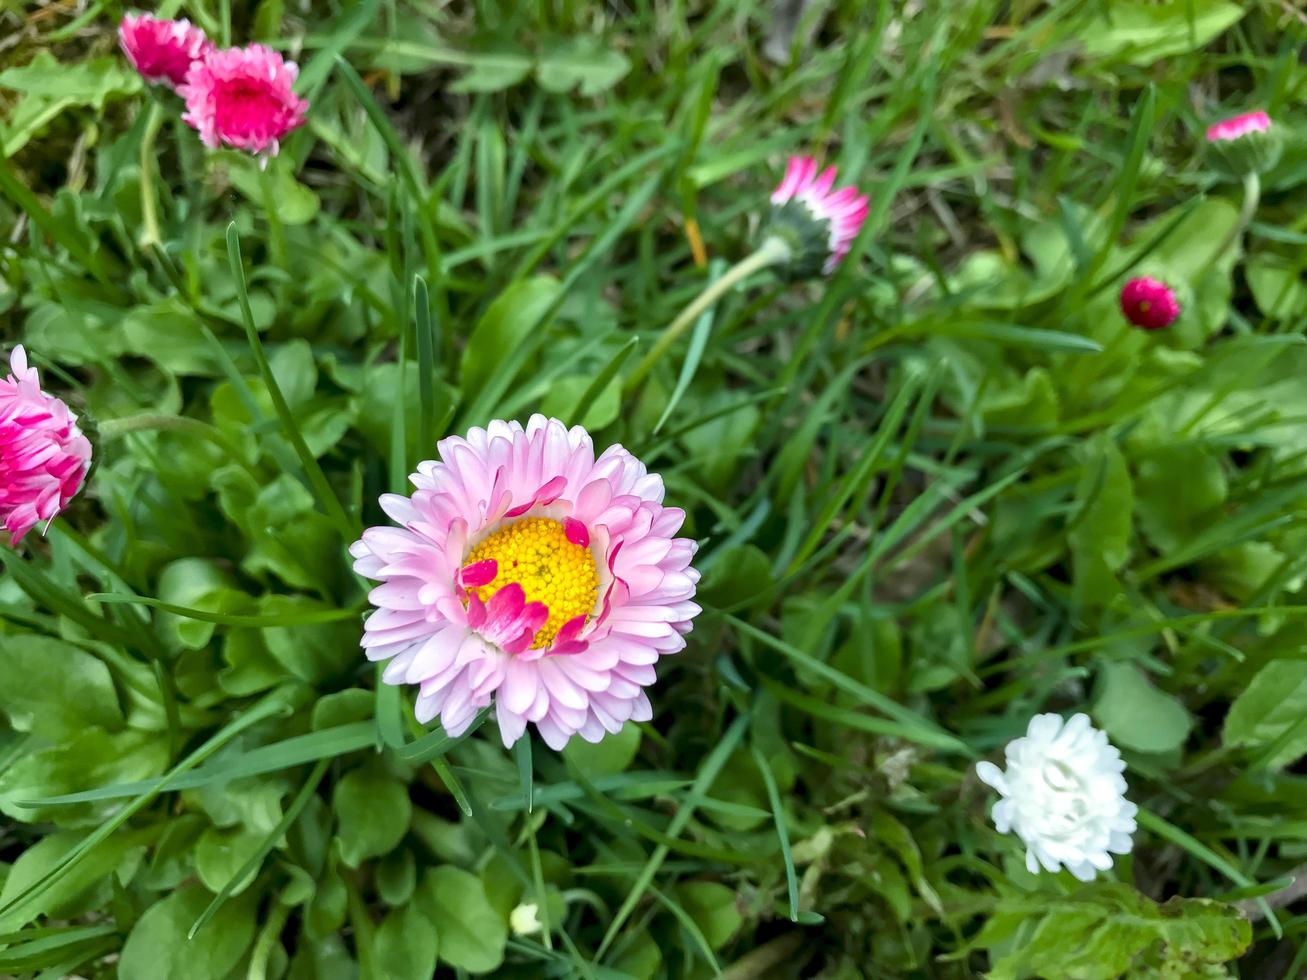 Pink daisy on green grass close up. Photo